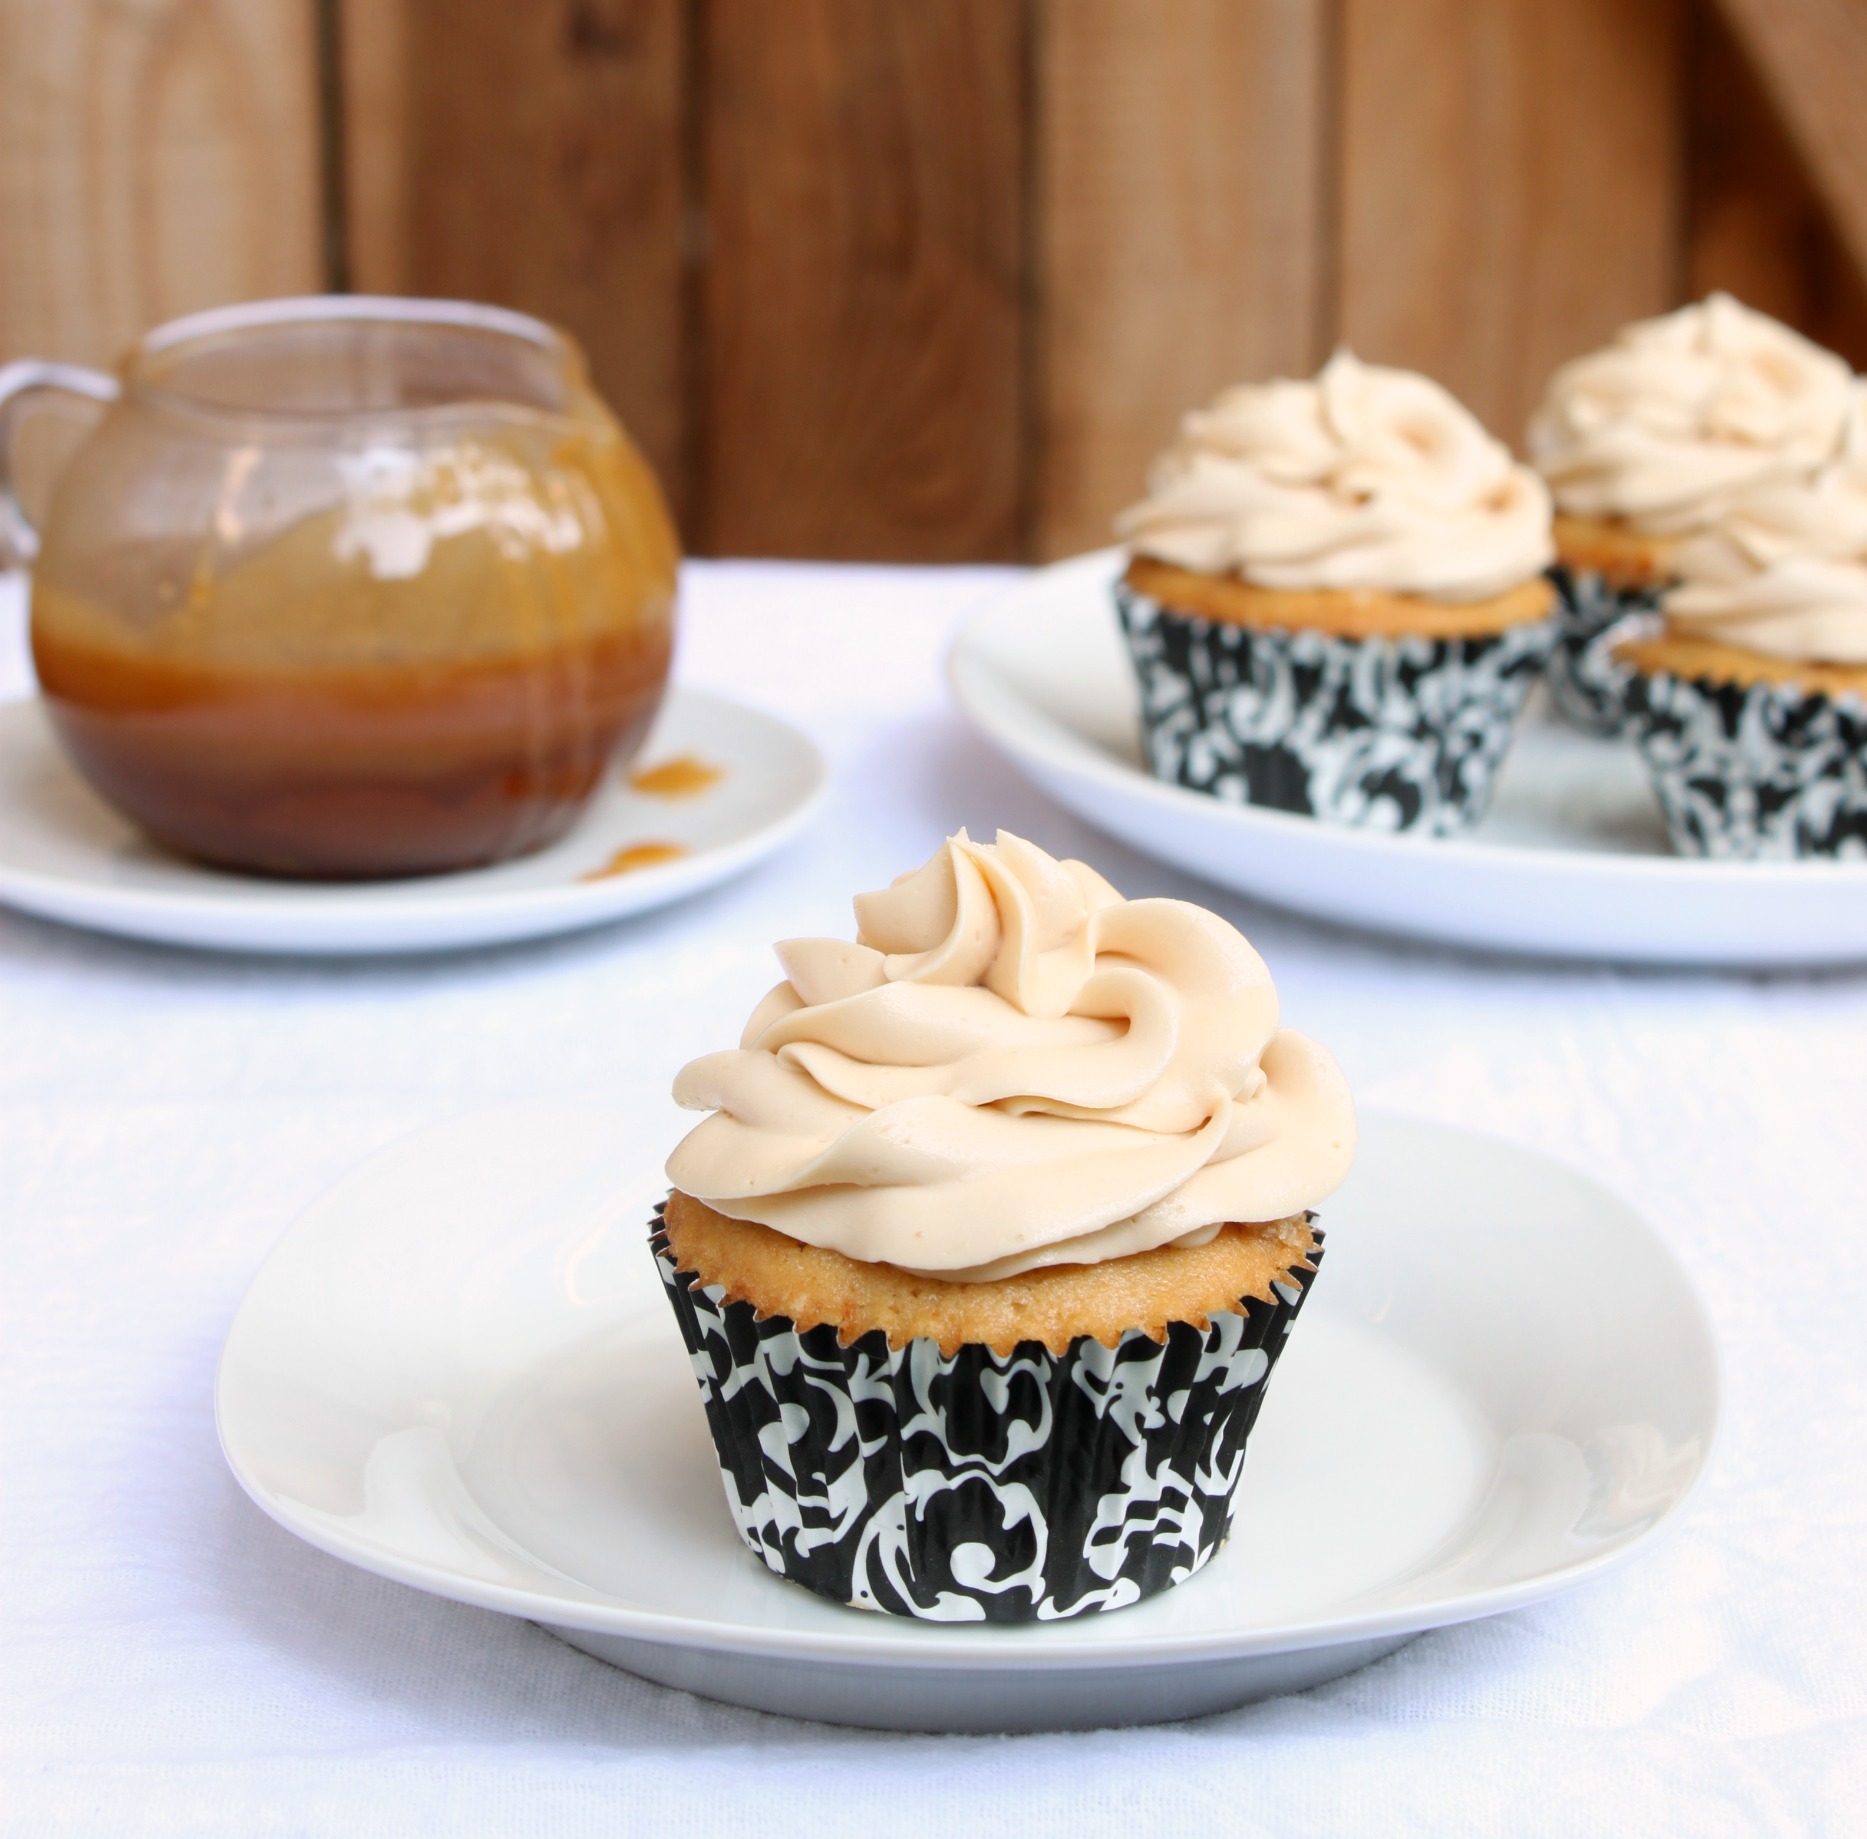 Salted caramel cupcakes 1 cropped